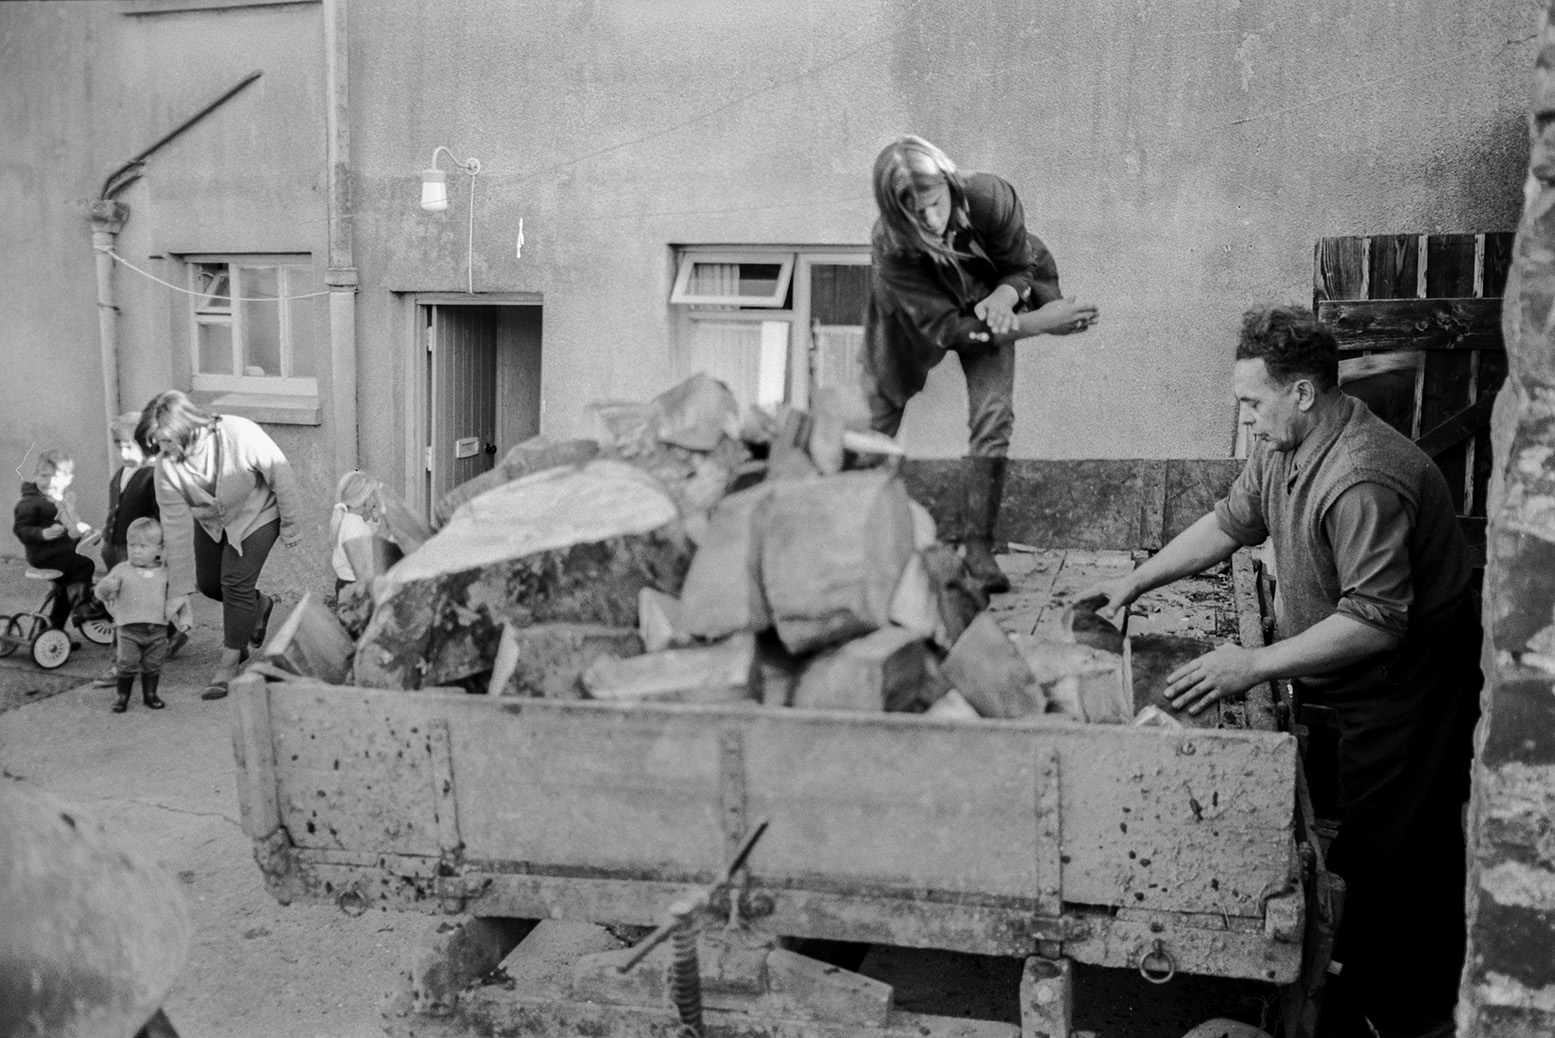 Derek Bright helping a man unload a log delivery from a trailer, possibly to a house in Beaford. A woman and children are in the background.